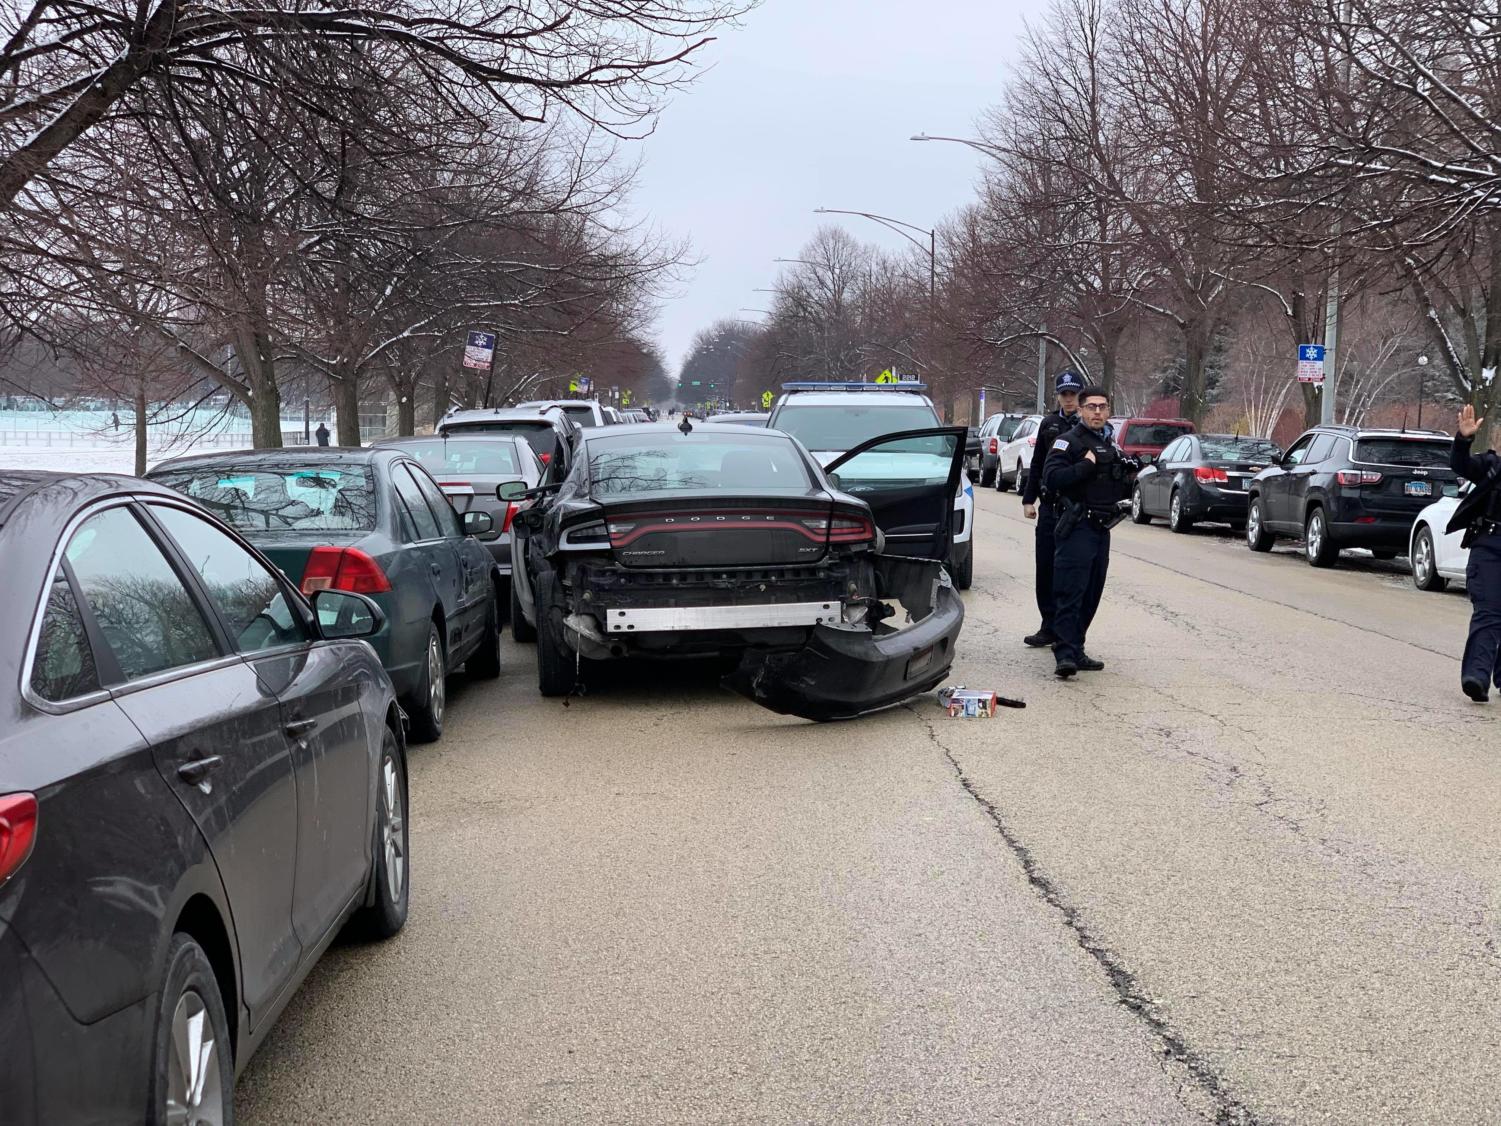 The black Dodge Charger that witnesses say belonged to the suspects was involved in an accident near the intersection of South Woodlawn Avenue and the Midway Plaisance.